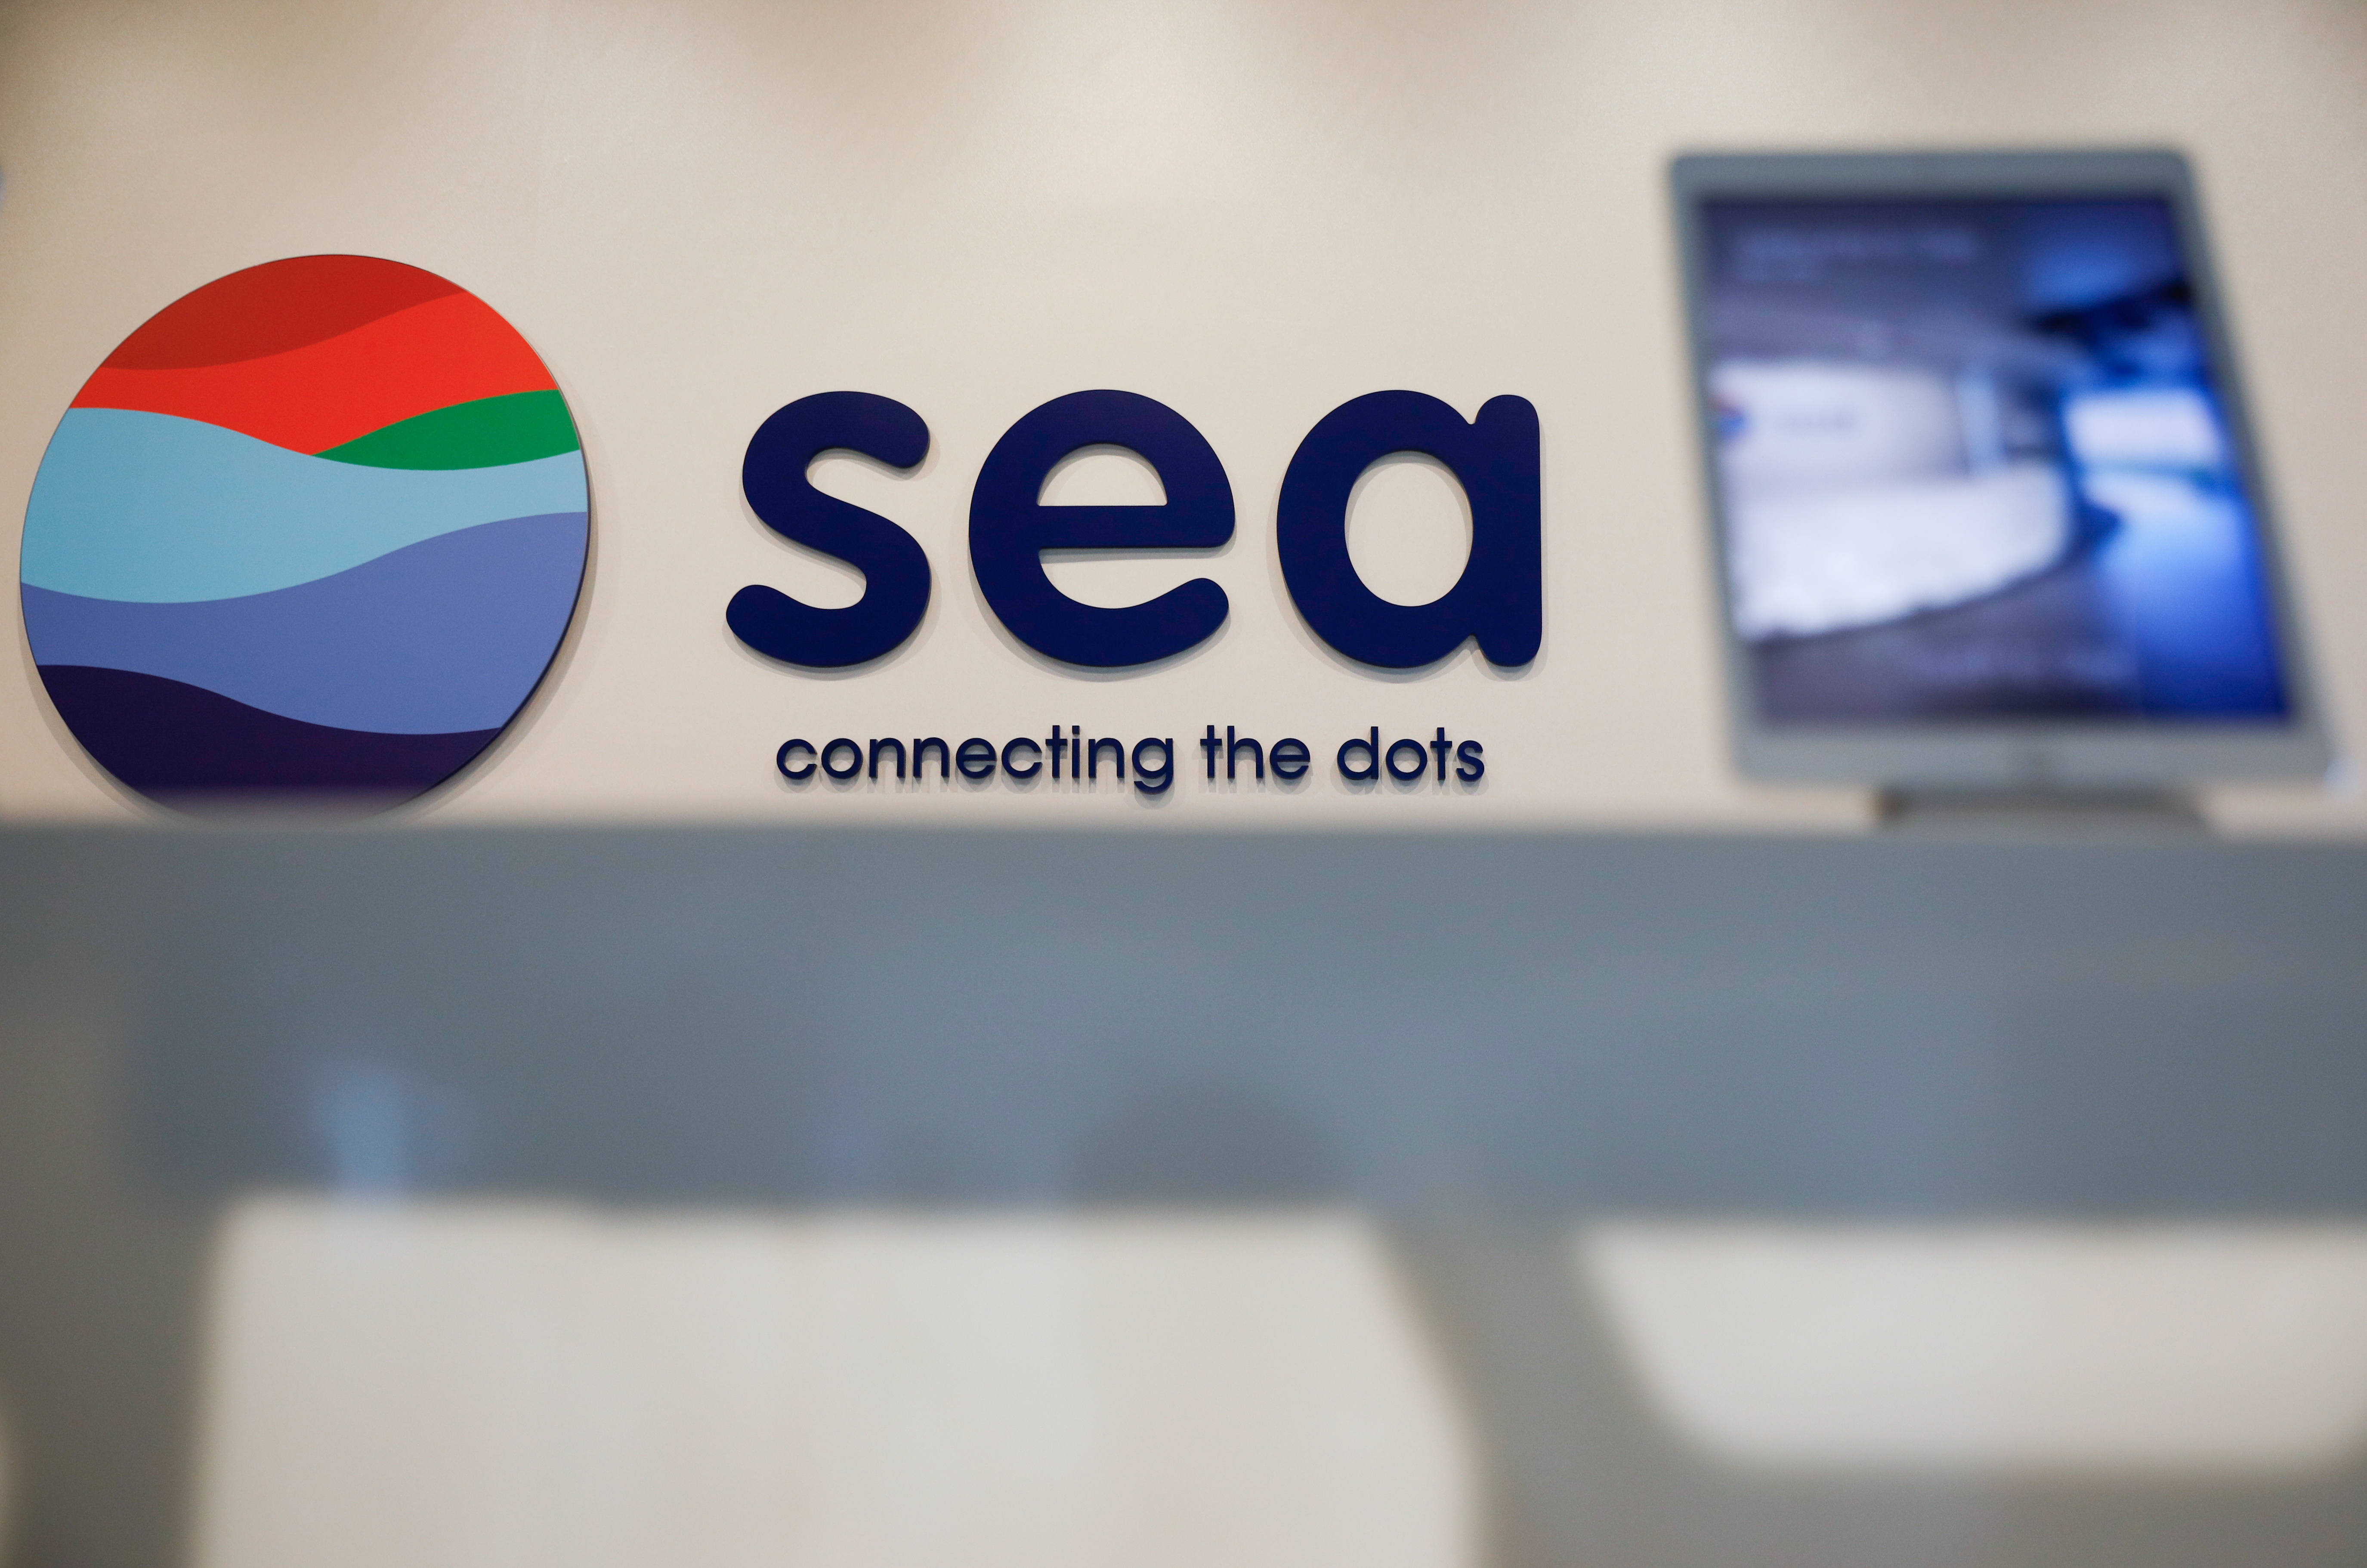 Sea Ltd's signage is pictured at their office in Singapore